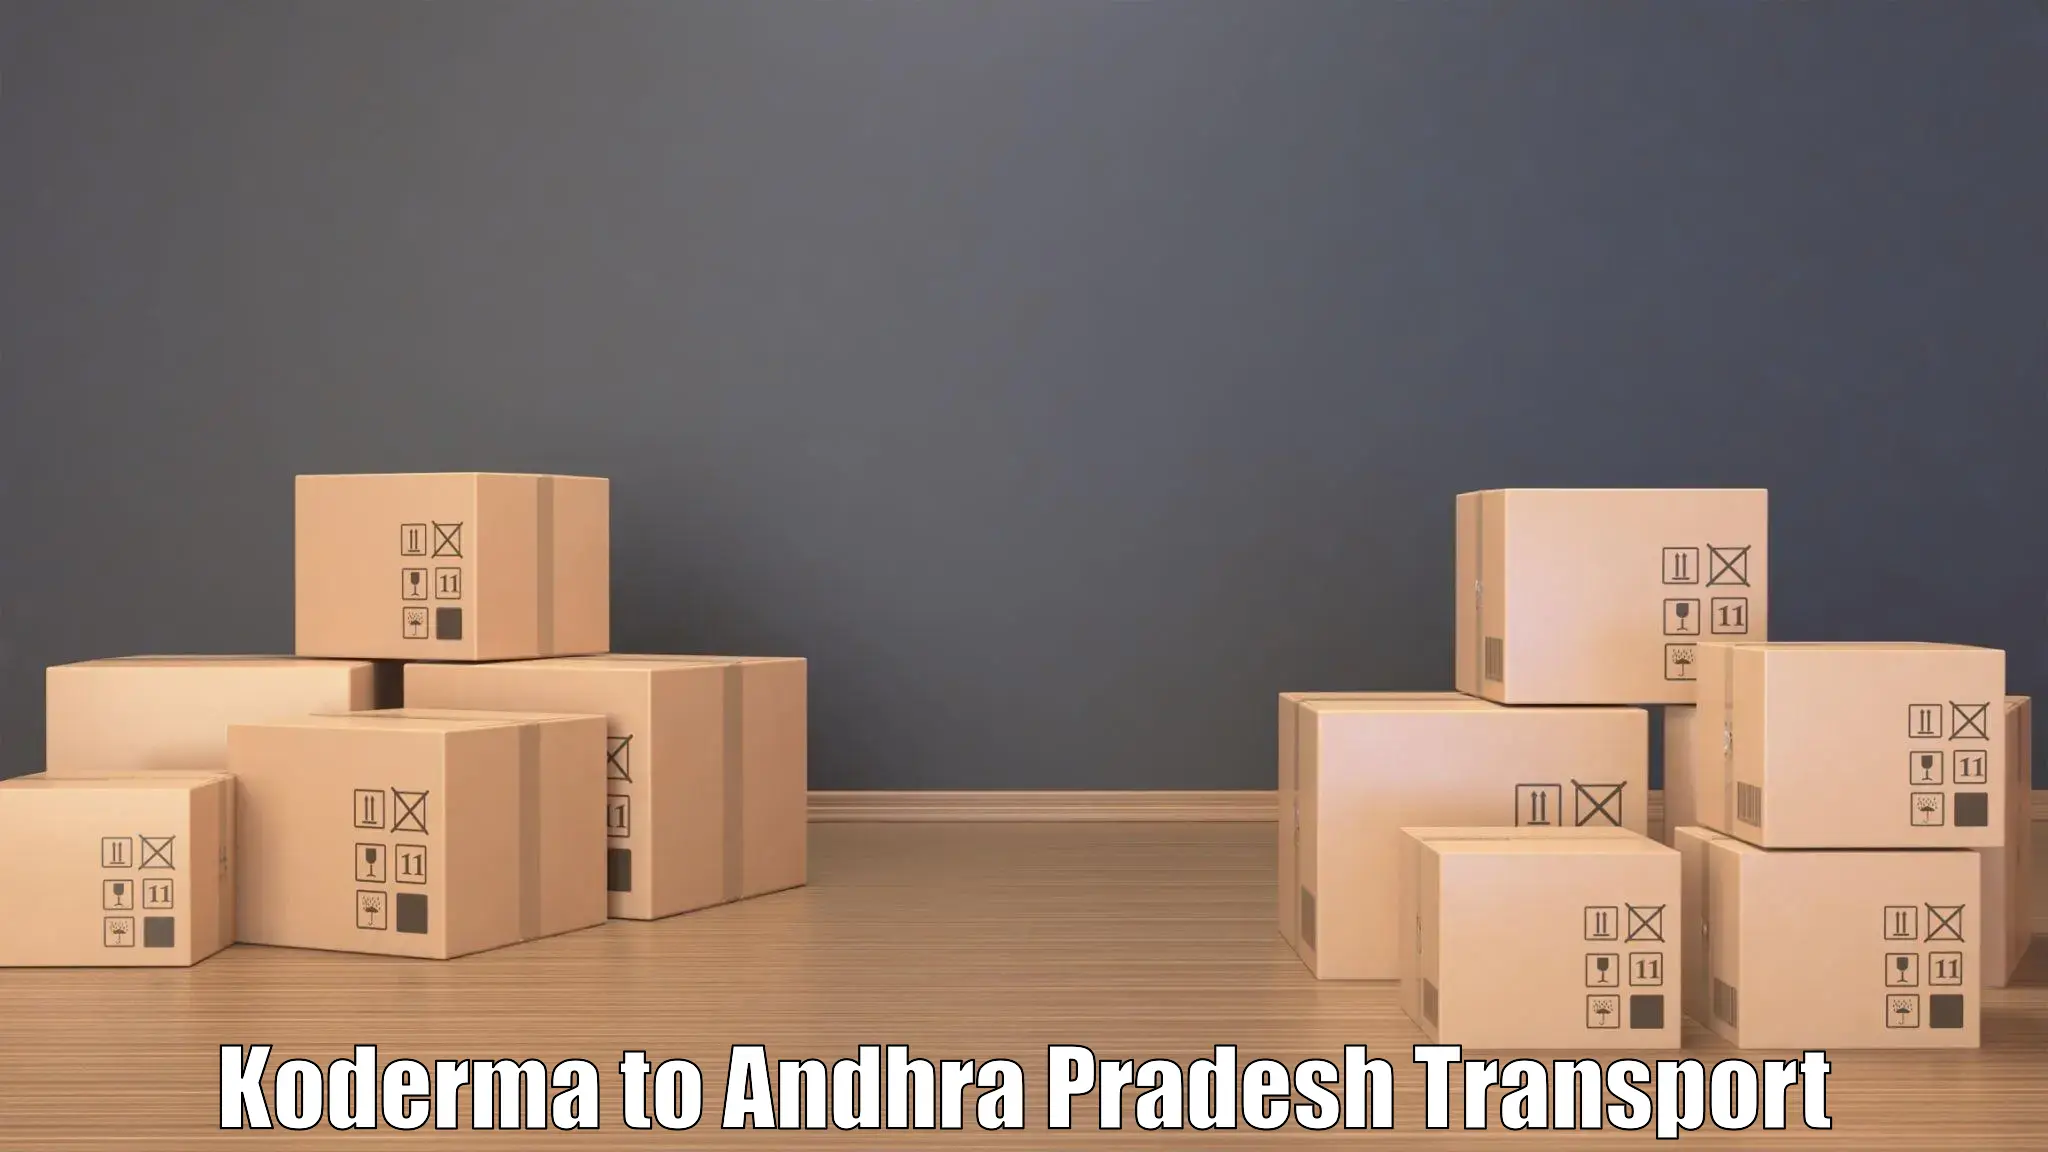 Air freight transport services in Koderma to Podalakur